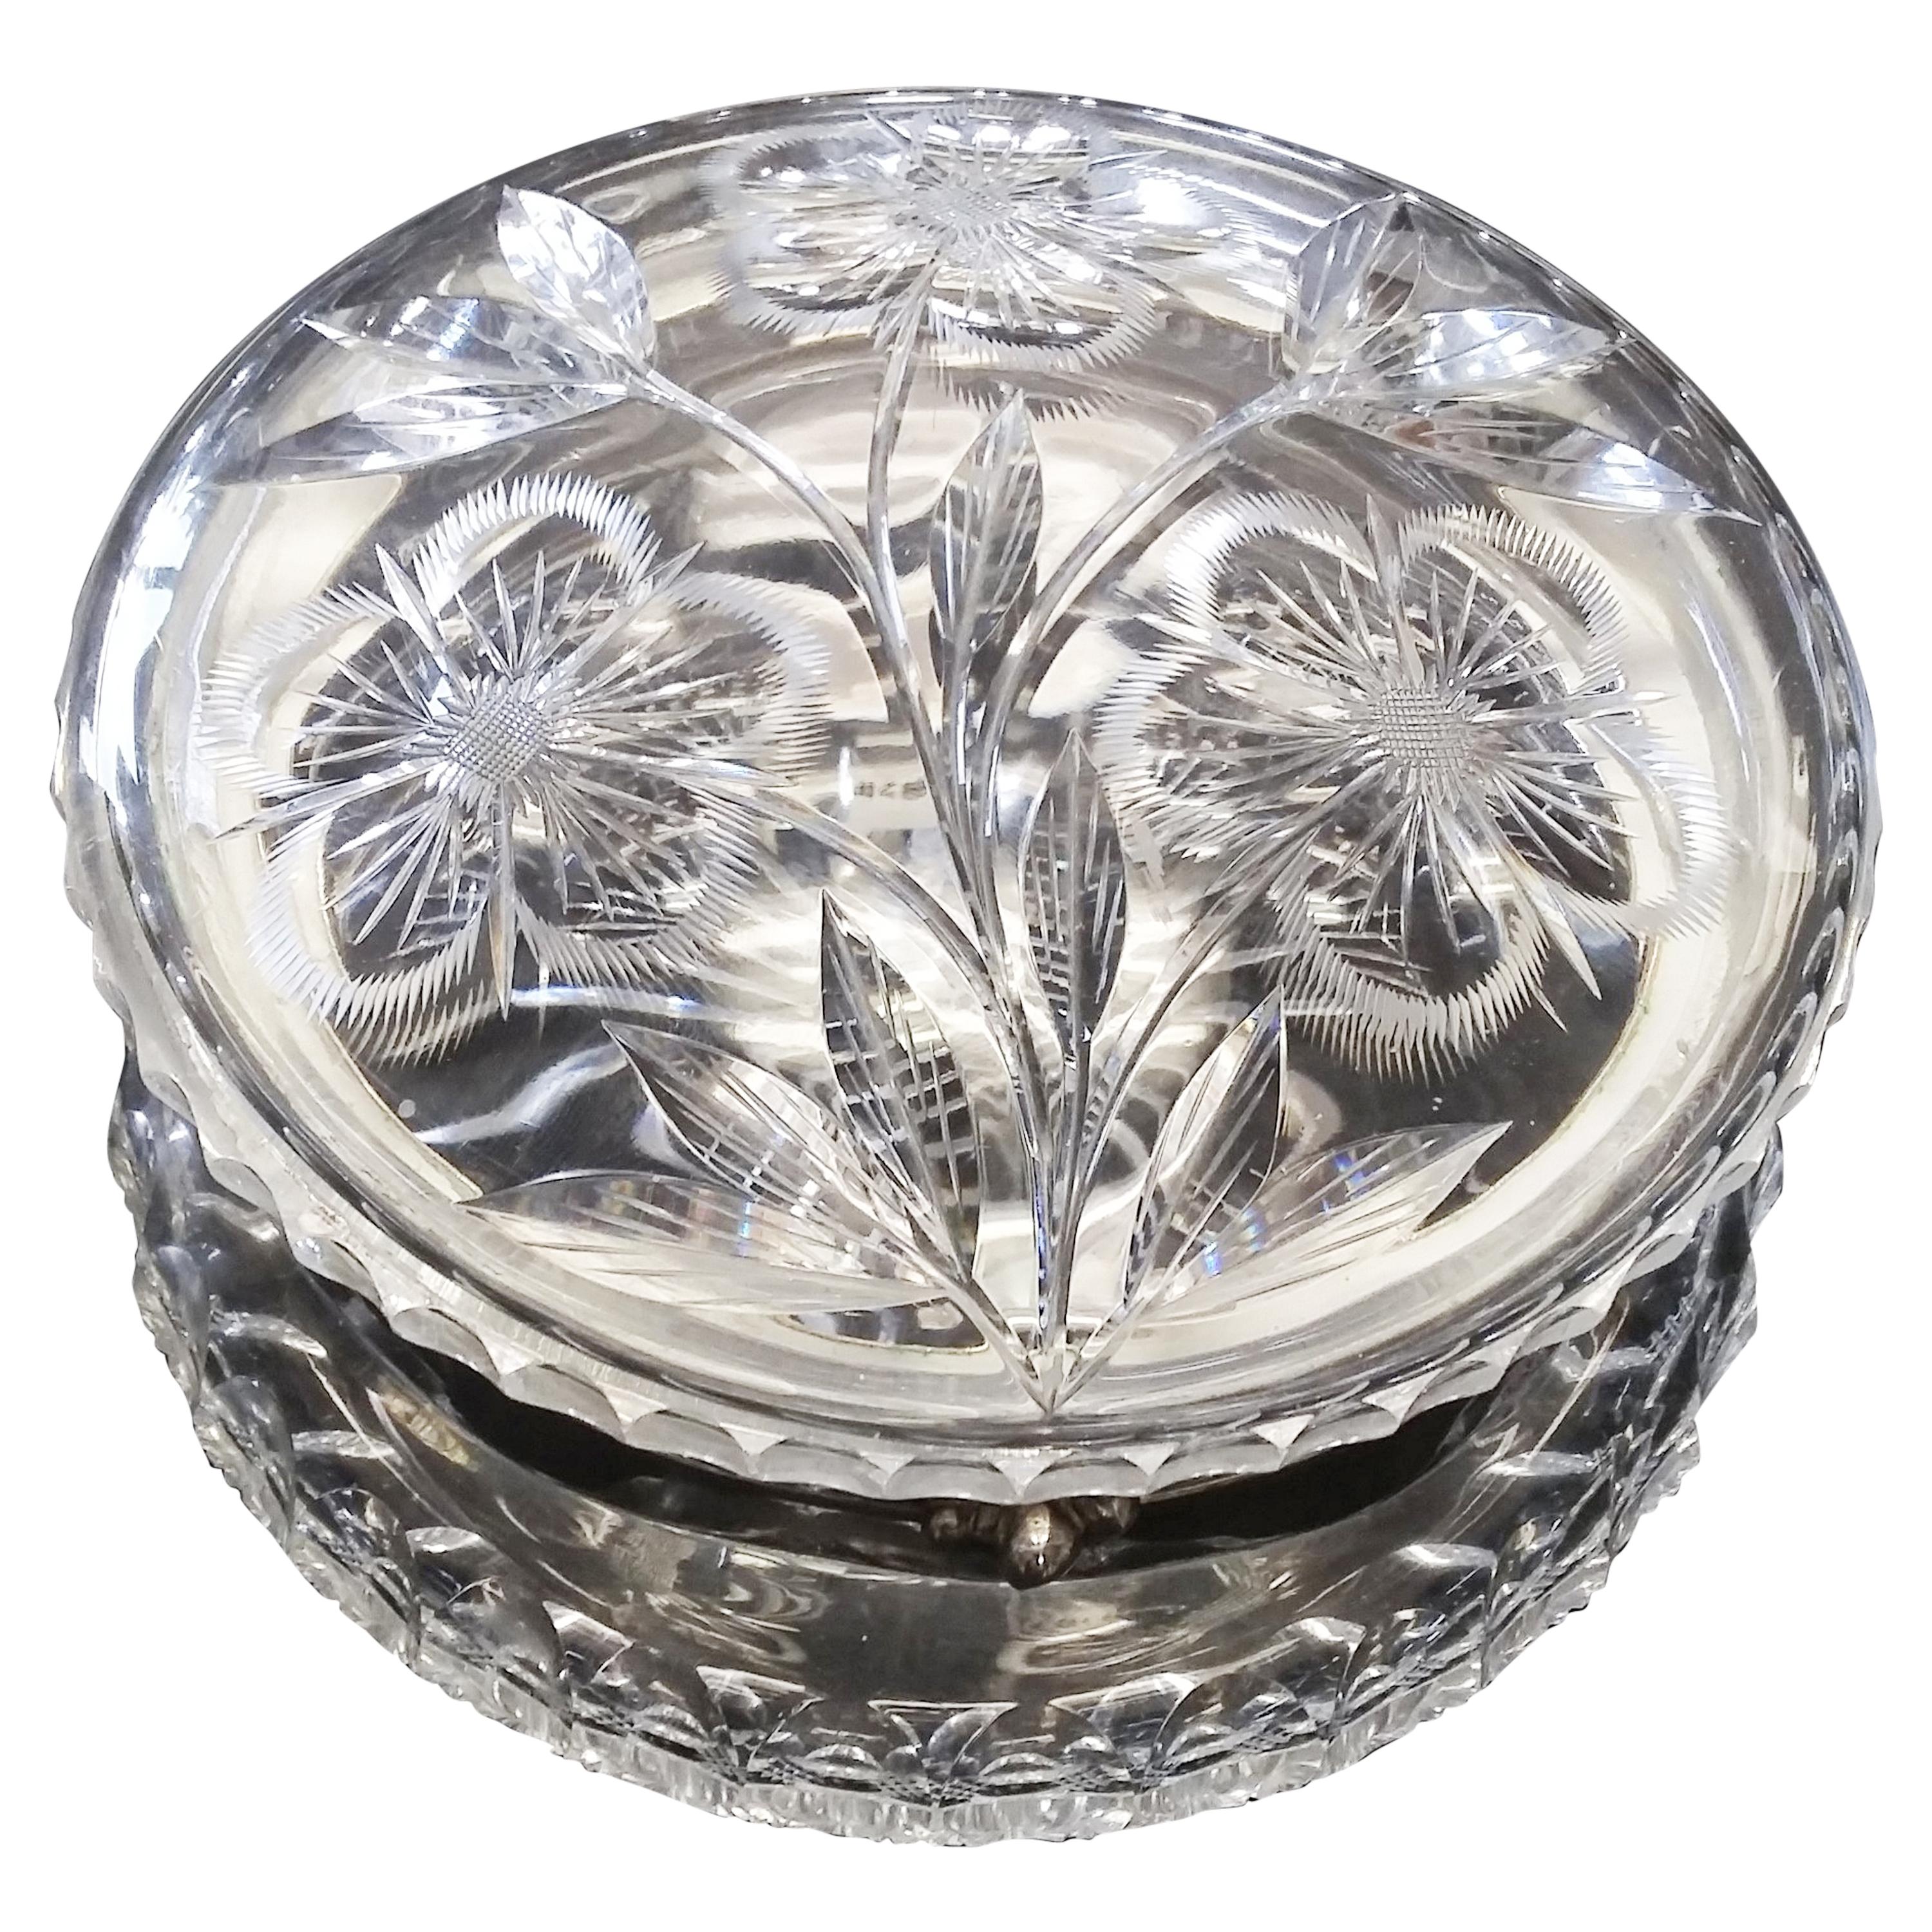 Round cut Crystal Box antique 19th century attributed to Pairpoint Mfg Co. For Sale